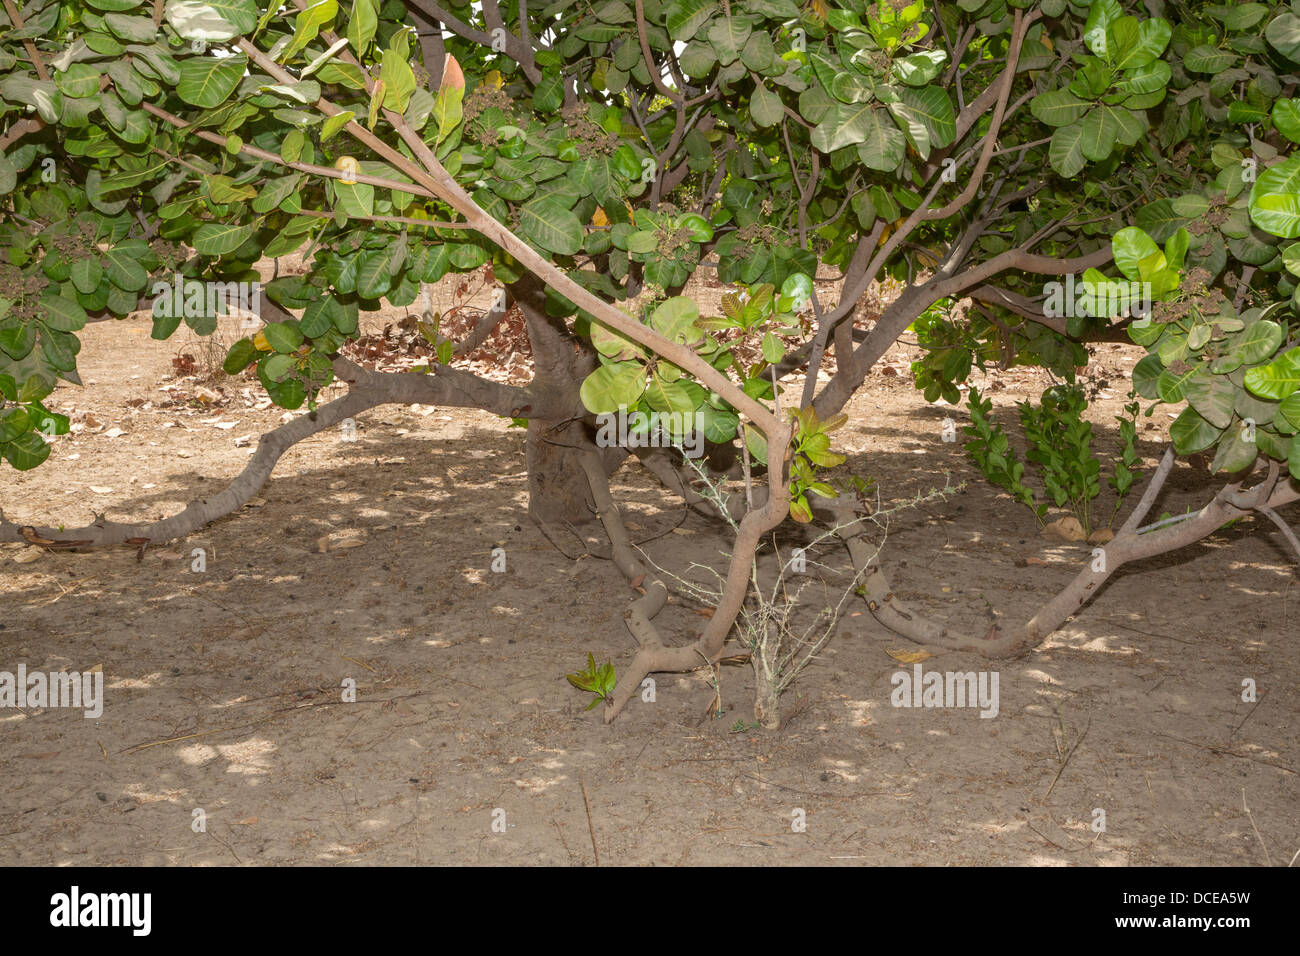 Example of a Less Well-tended Cashew Tree Farm, with less pruning of lower limbs, less clearing of under brush.  Senegal. Stock Photo